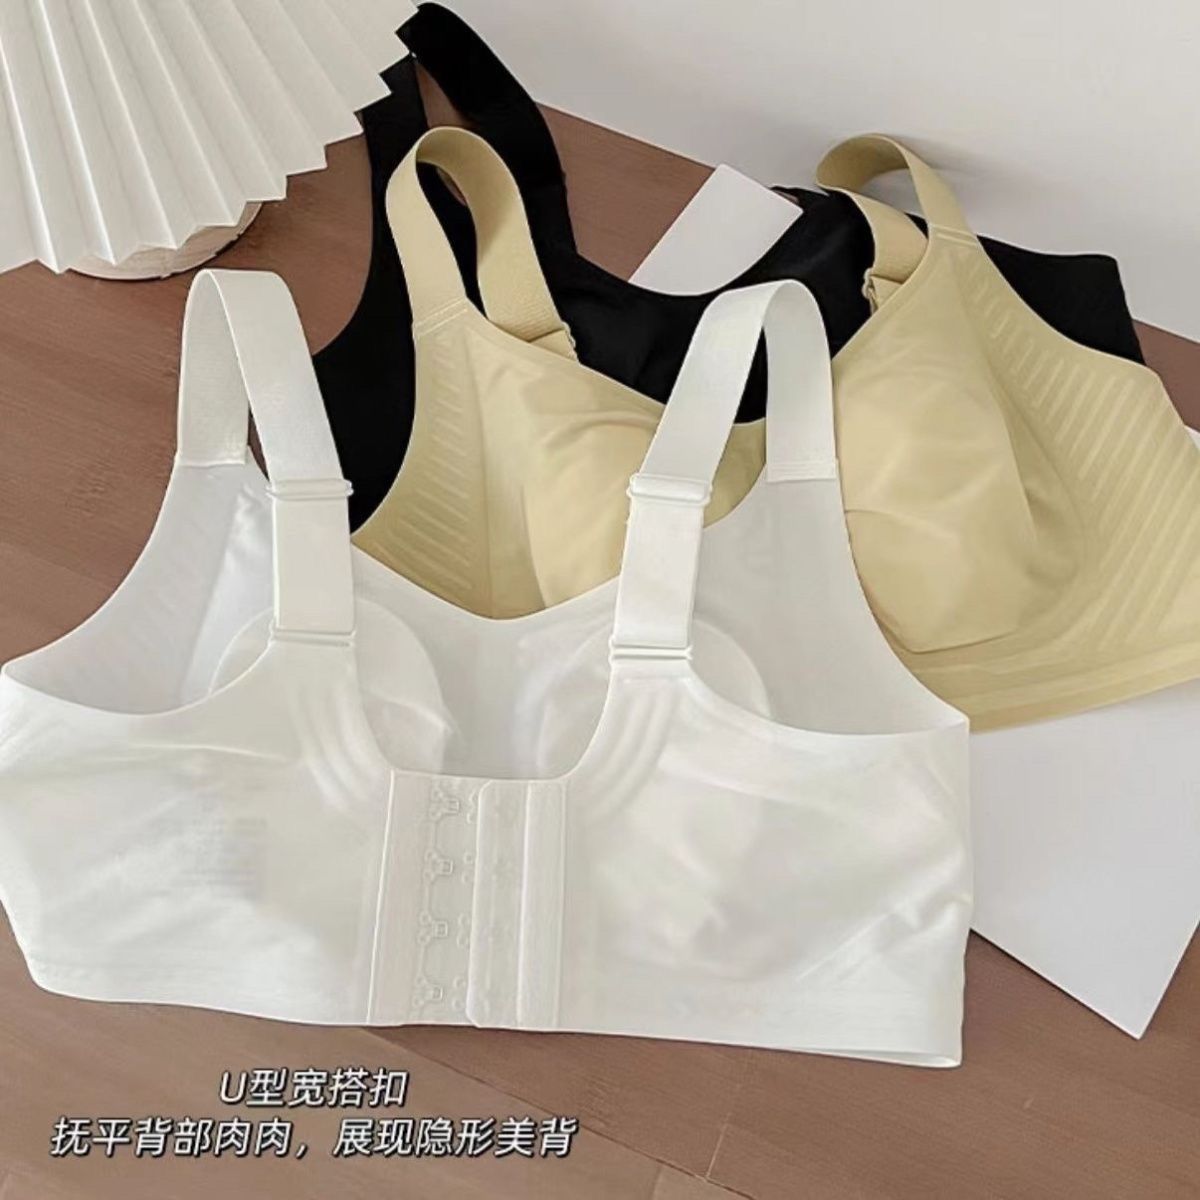 Big breasts showing small underwear women's summer ultra-thin seamless rabbit ears large size breast shrinking breasts anti-sagging bra